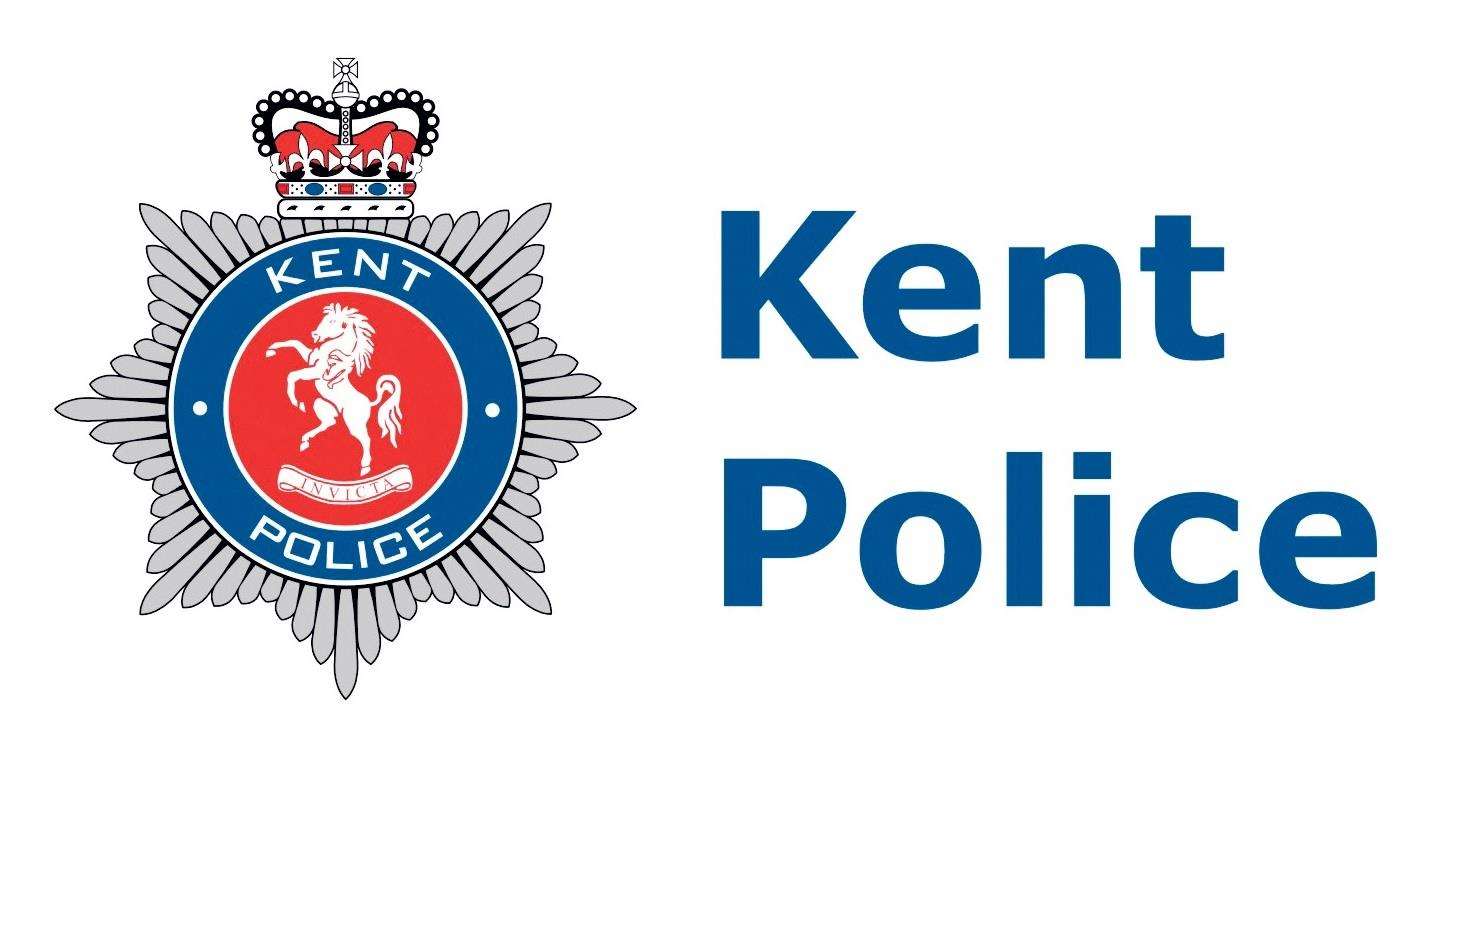 Kent Police confirmed an officer called the family to break the news